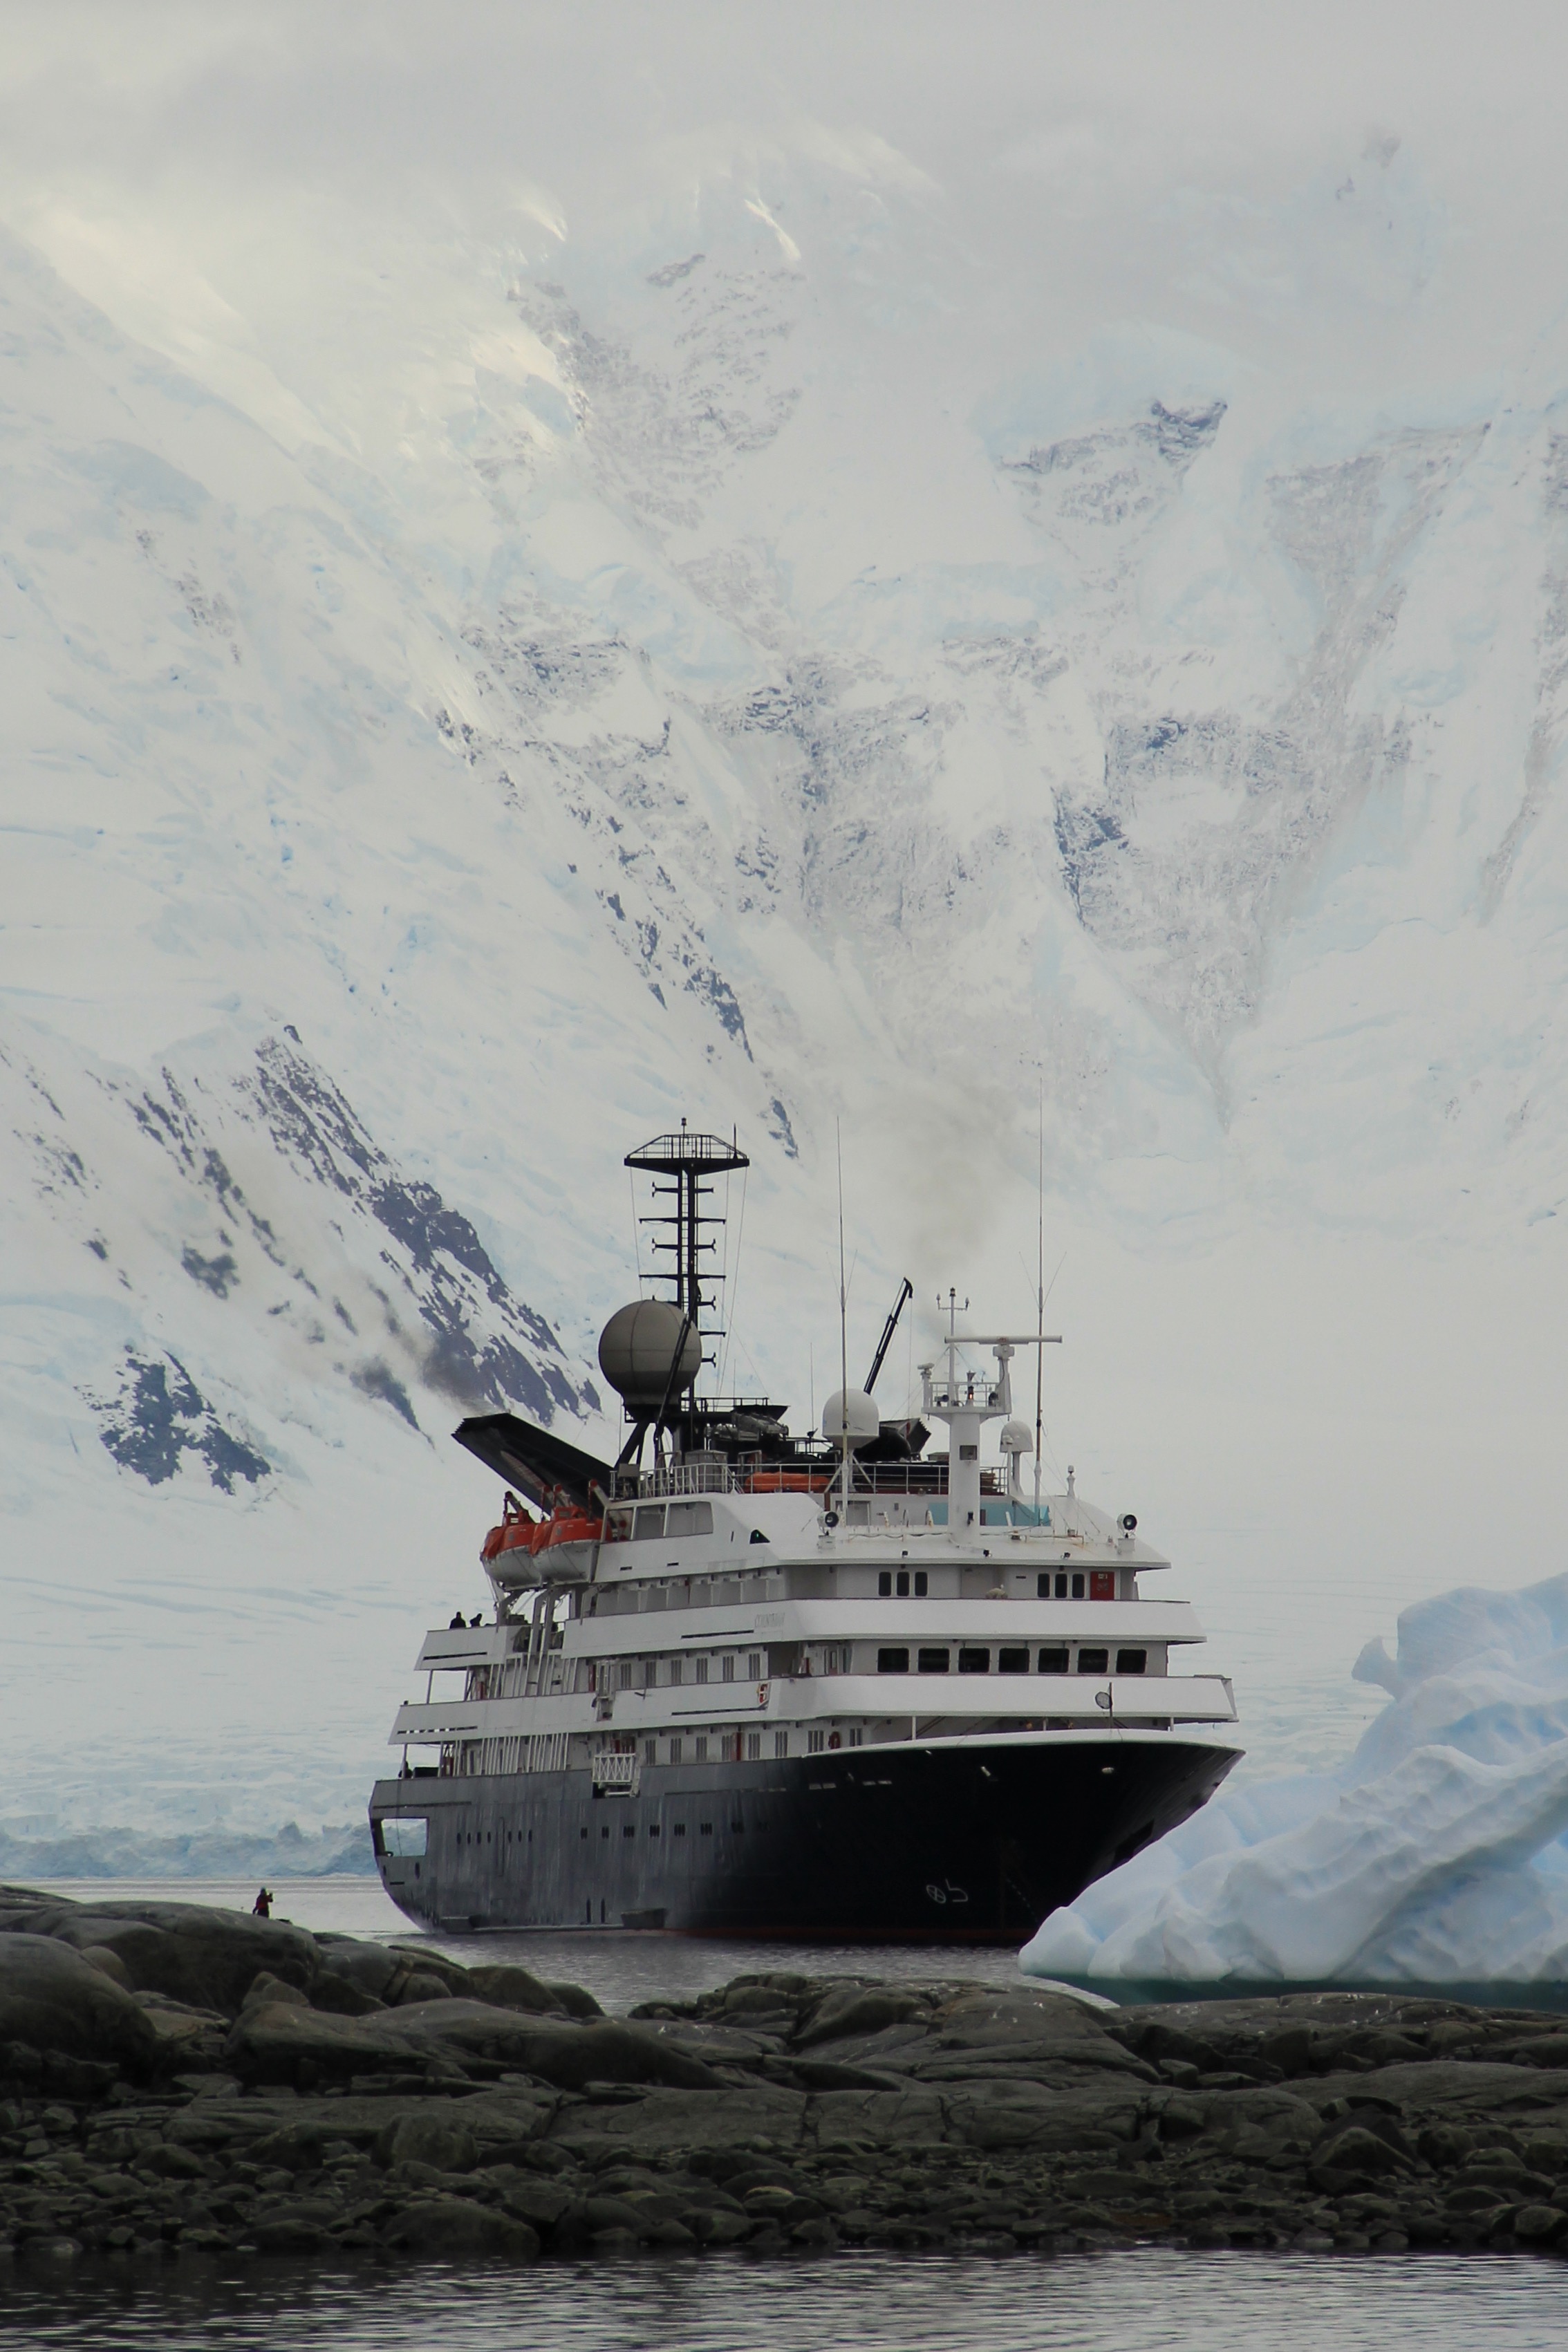 Our ship, the Corinthian. It takes 48 hours to sail from Tierra del Fuego, Argentina, to the northern edge of the Antarctic Peninsula.